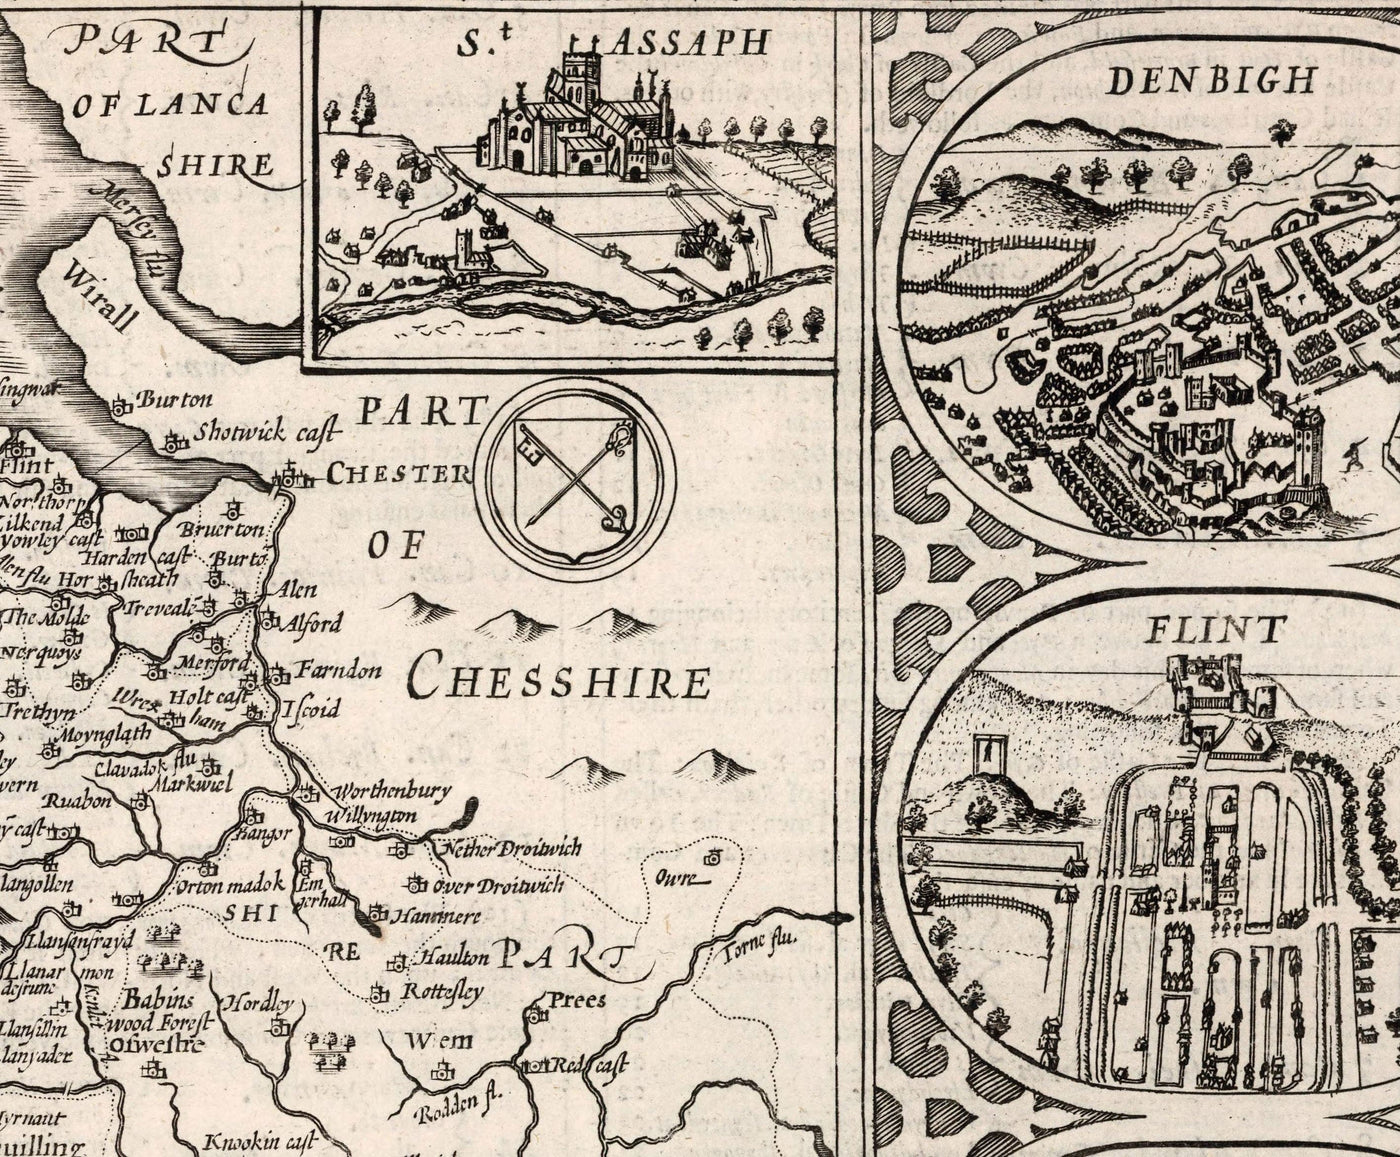 Old Monochrome Map of Wales, Cymru, 1611 by John Speed - Cities, Towns, Counties, Cardiff, Pembrokeshire, Anglesey